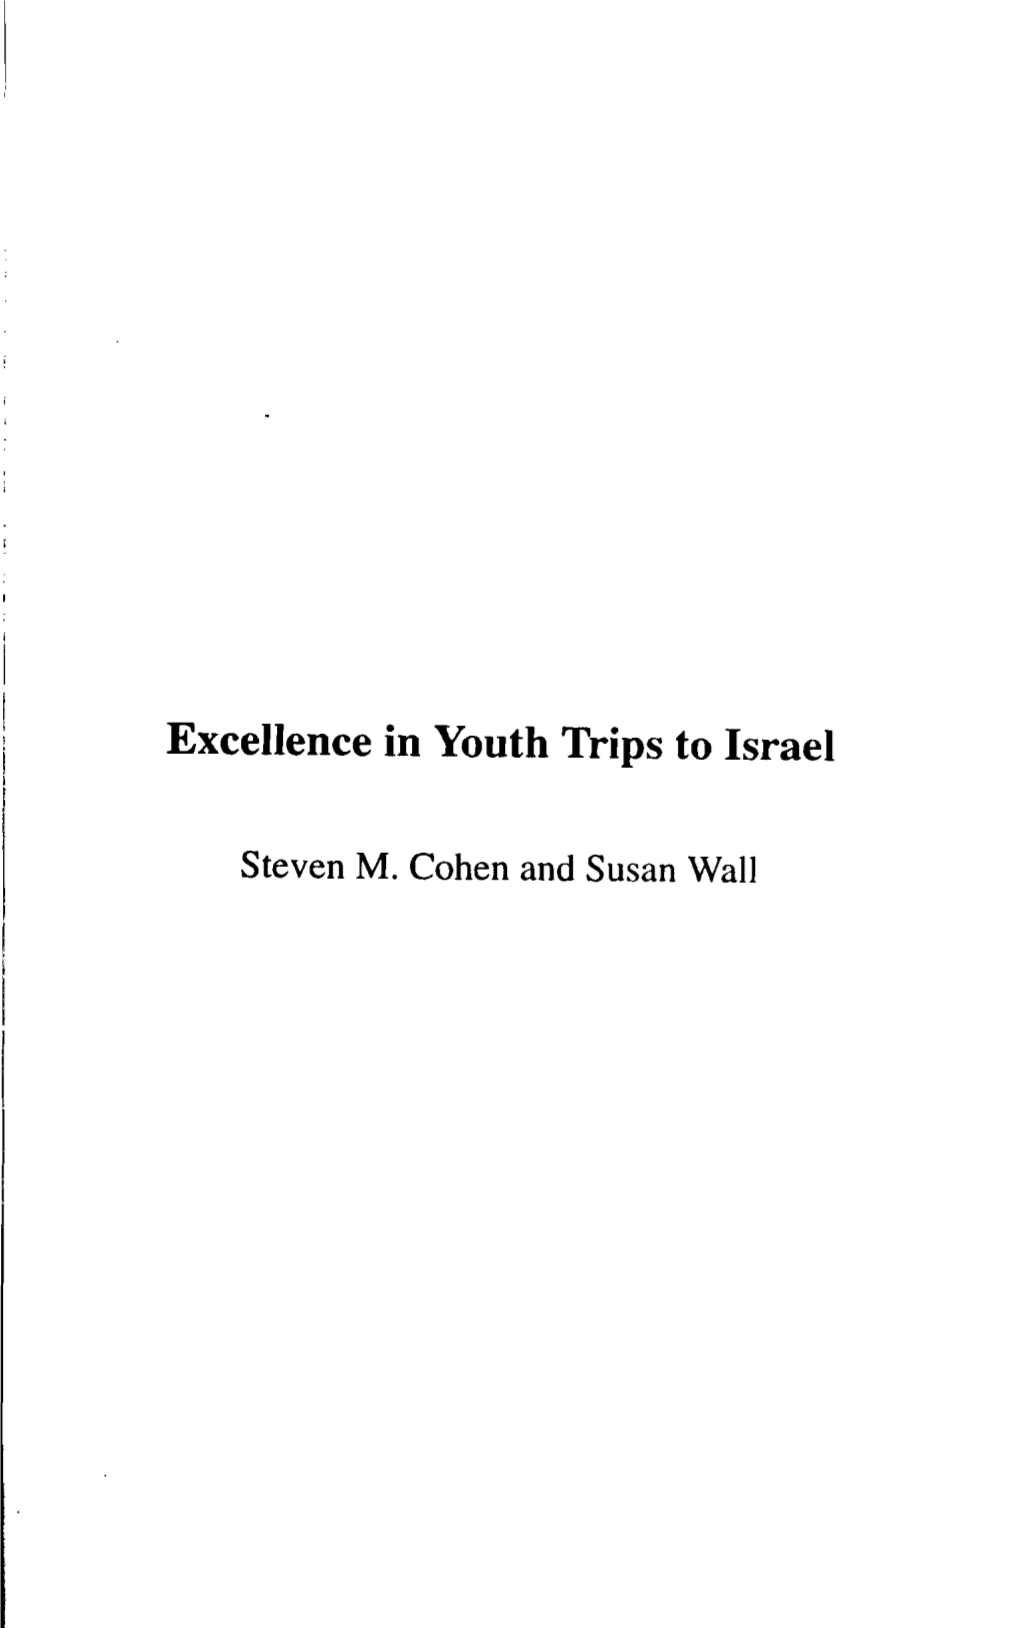 Excellence in Youth Trips to Israel .BOUT the AUTHOR Hes Philosophy of Education and Jewish